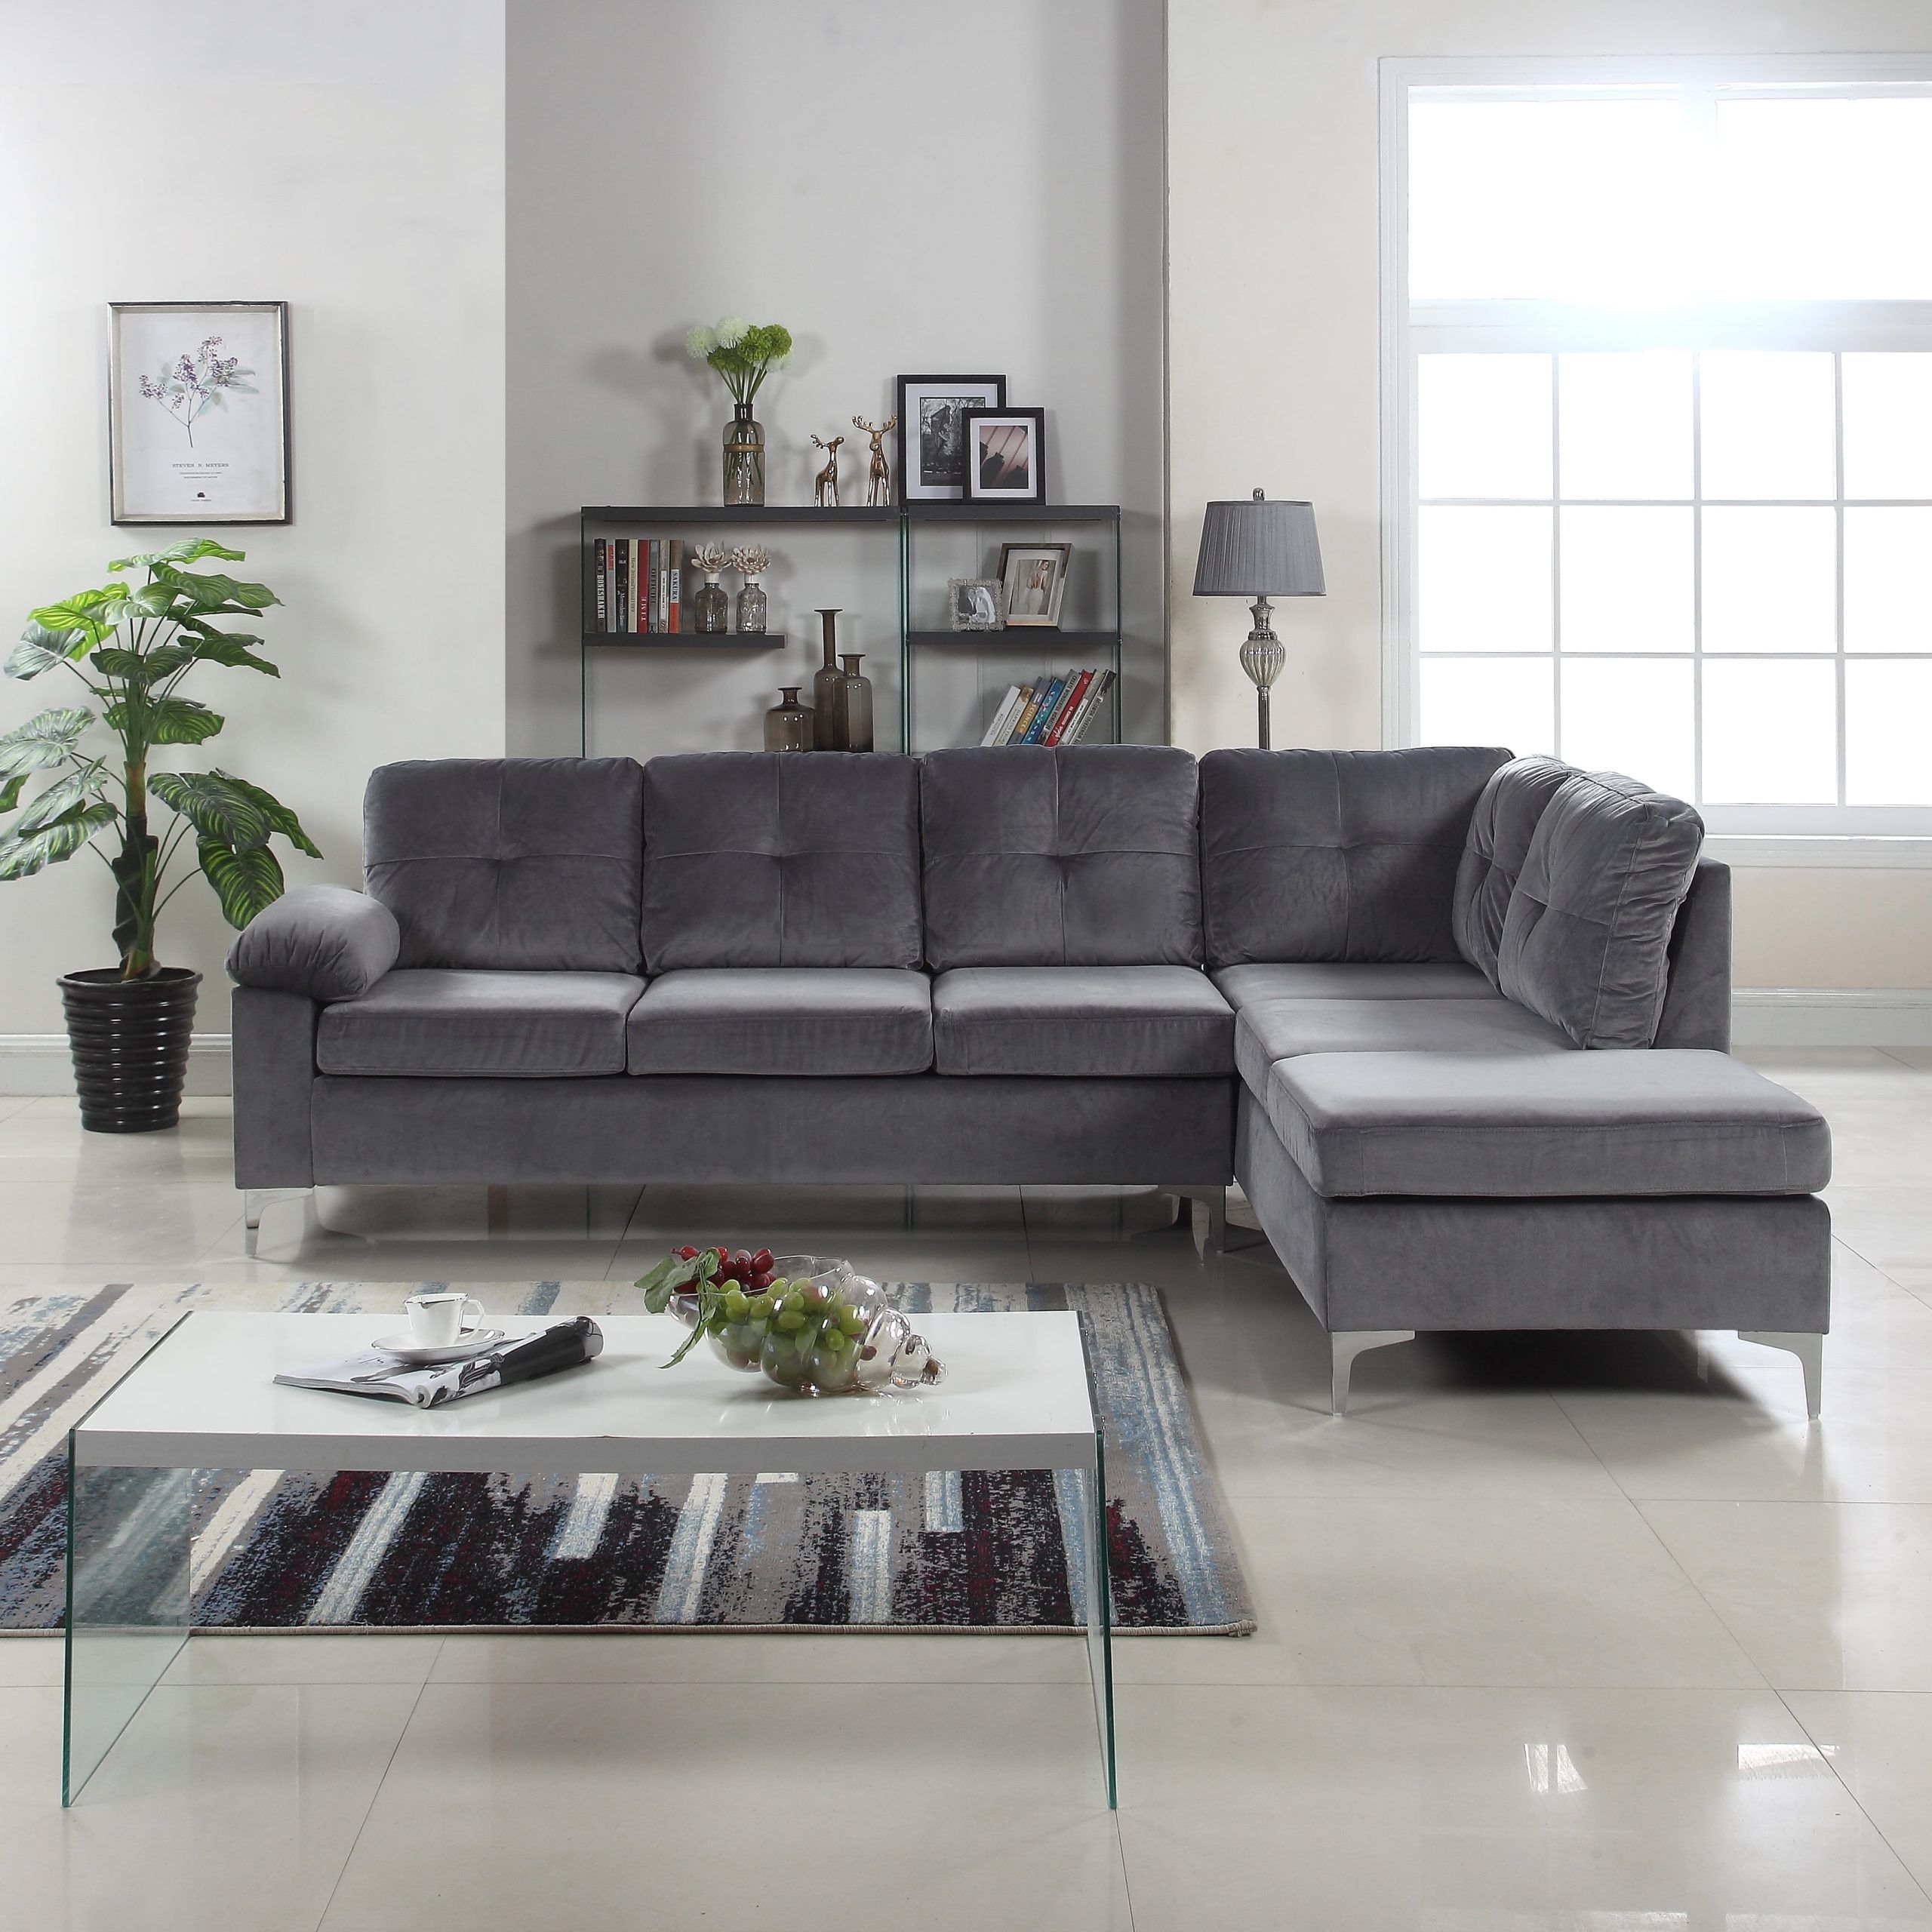 Tufted Brush Microfiber Sectional Sofa, Large L Shape Couch, Dark Grey Intended For Dark Grey Polyester Sofa Couches (View 12 of 20)